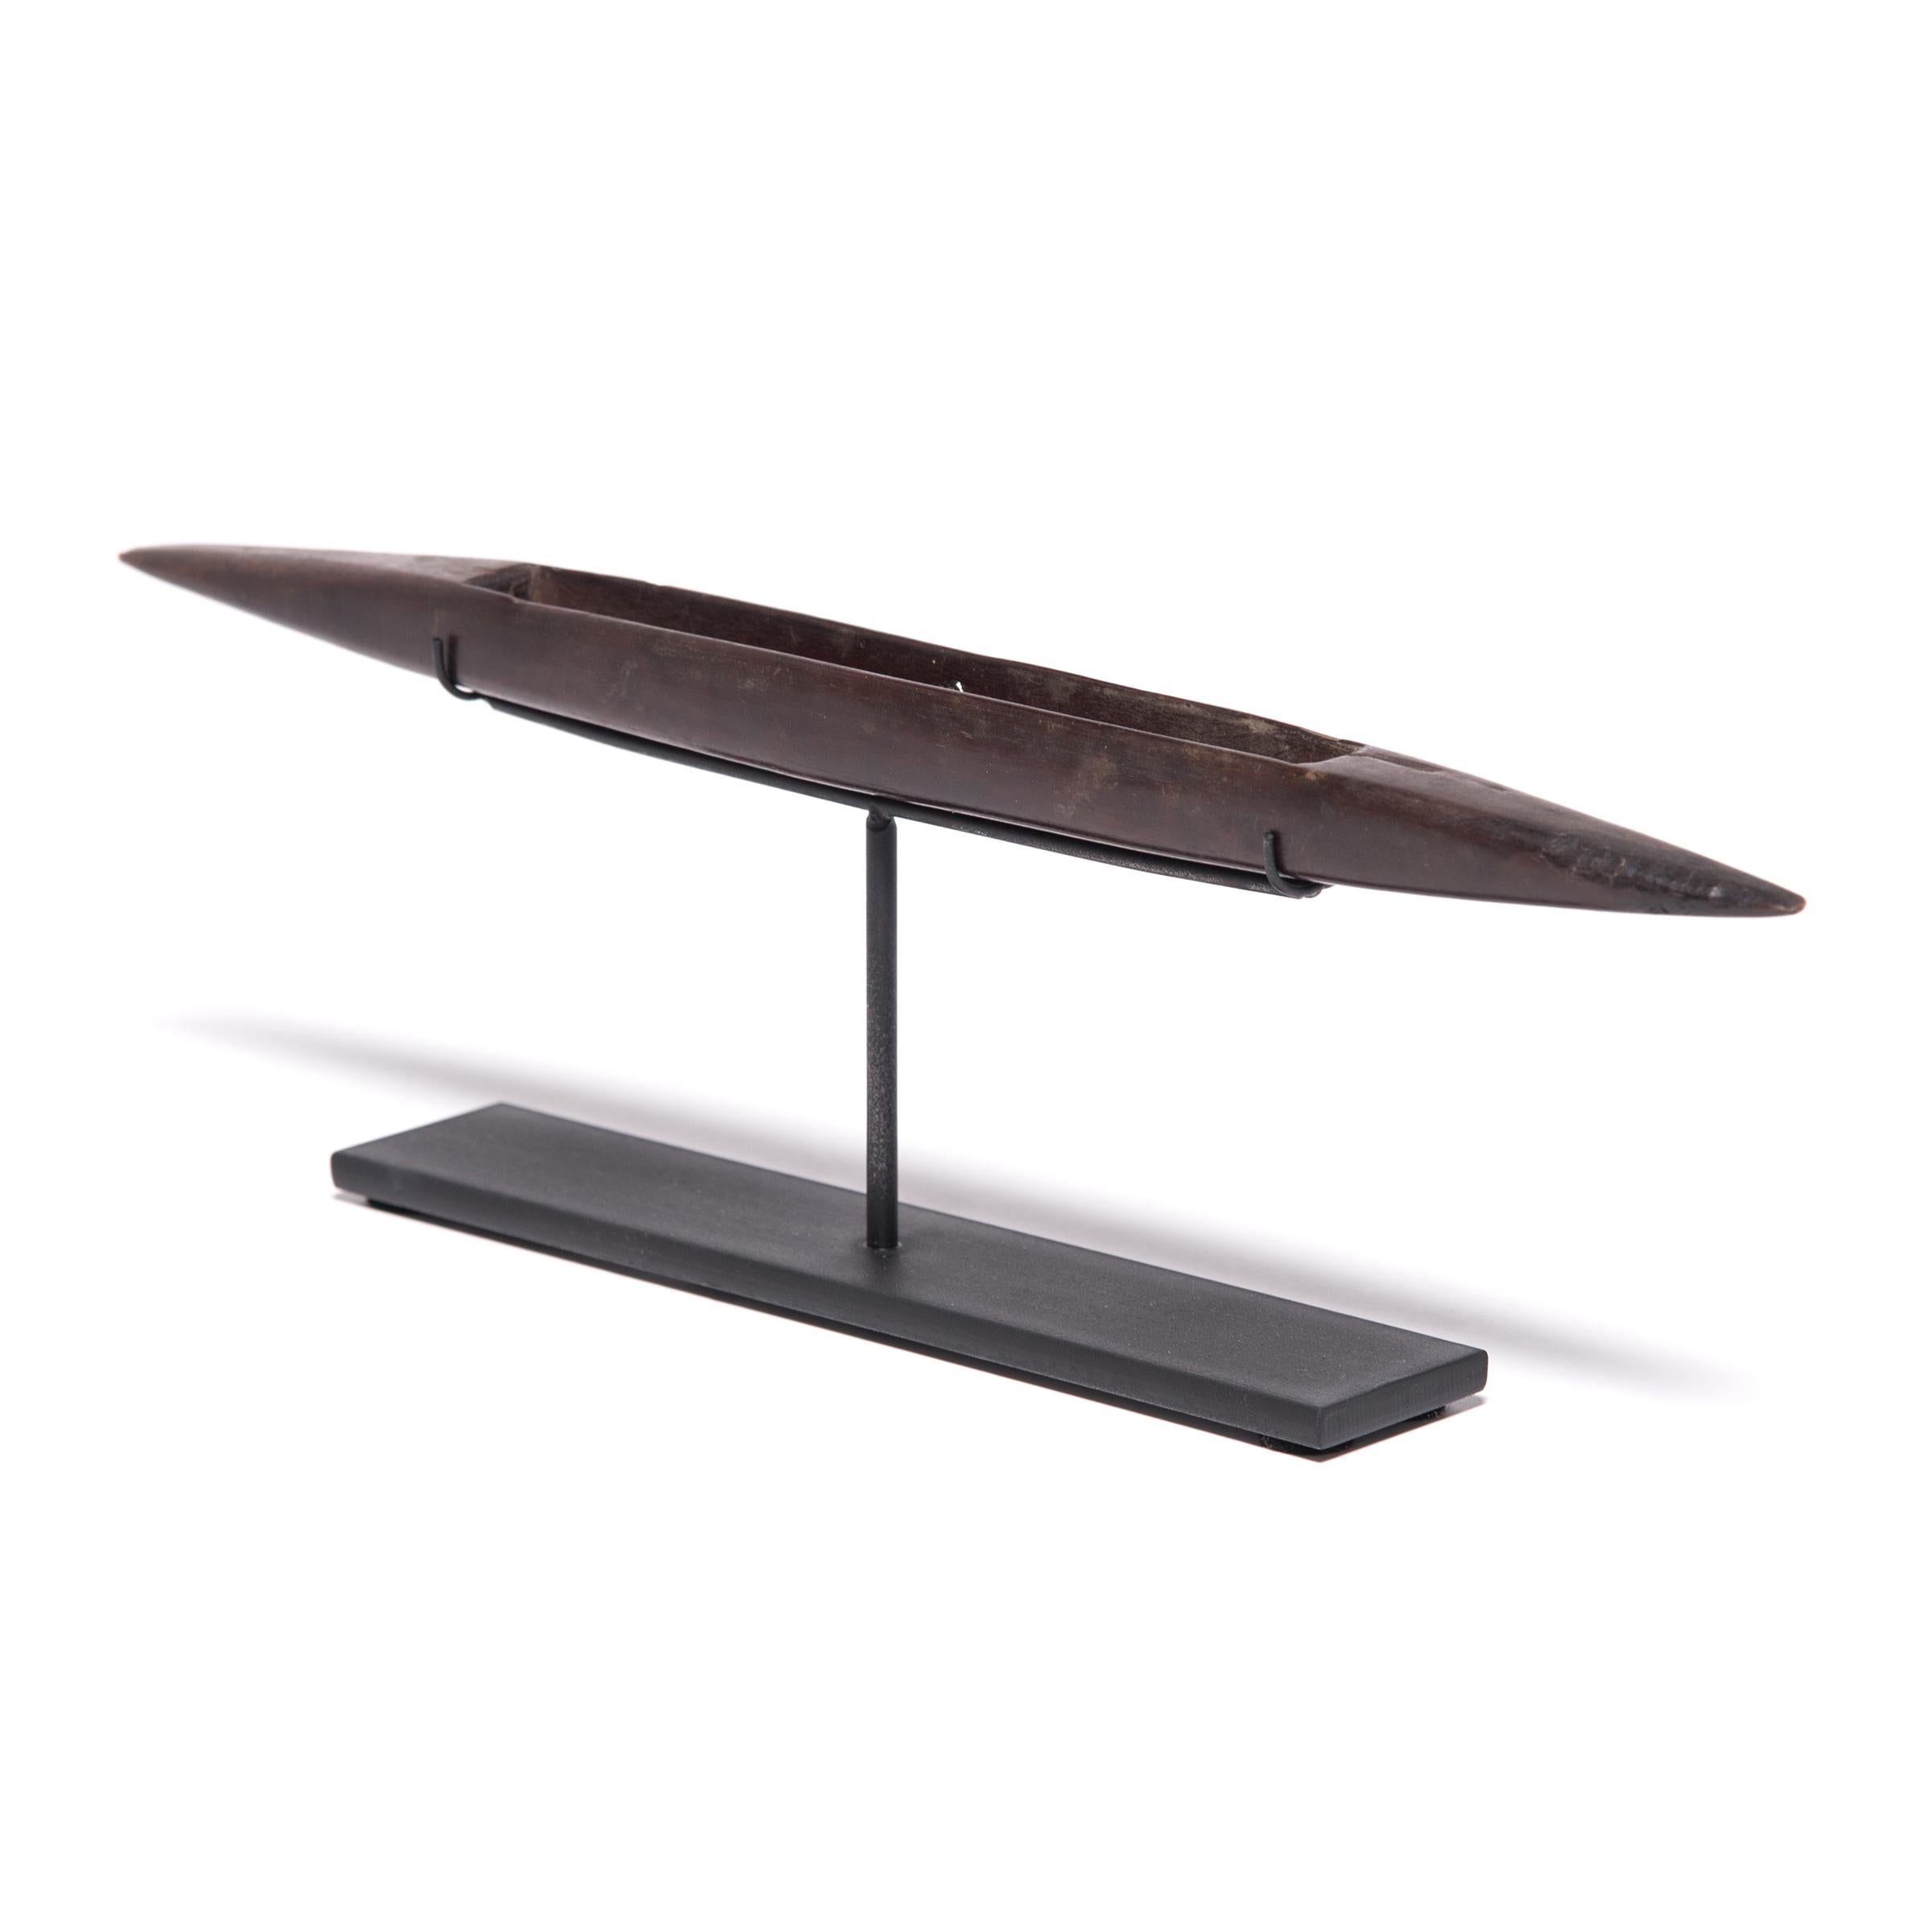 We’ve mounted this vintage wood weaving shuttle from the Philippines on a custom metal stand to highlight its sleek, sculptural form. Designed as a tool for an expert weaver, the late 19th century shuttle was used to carry weft yarns of spun silk